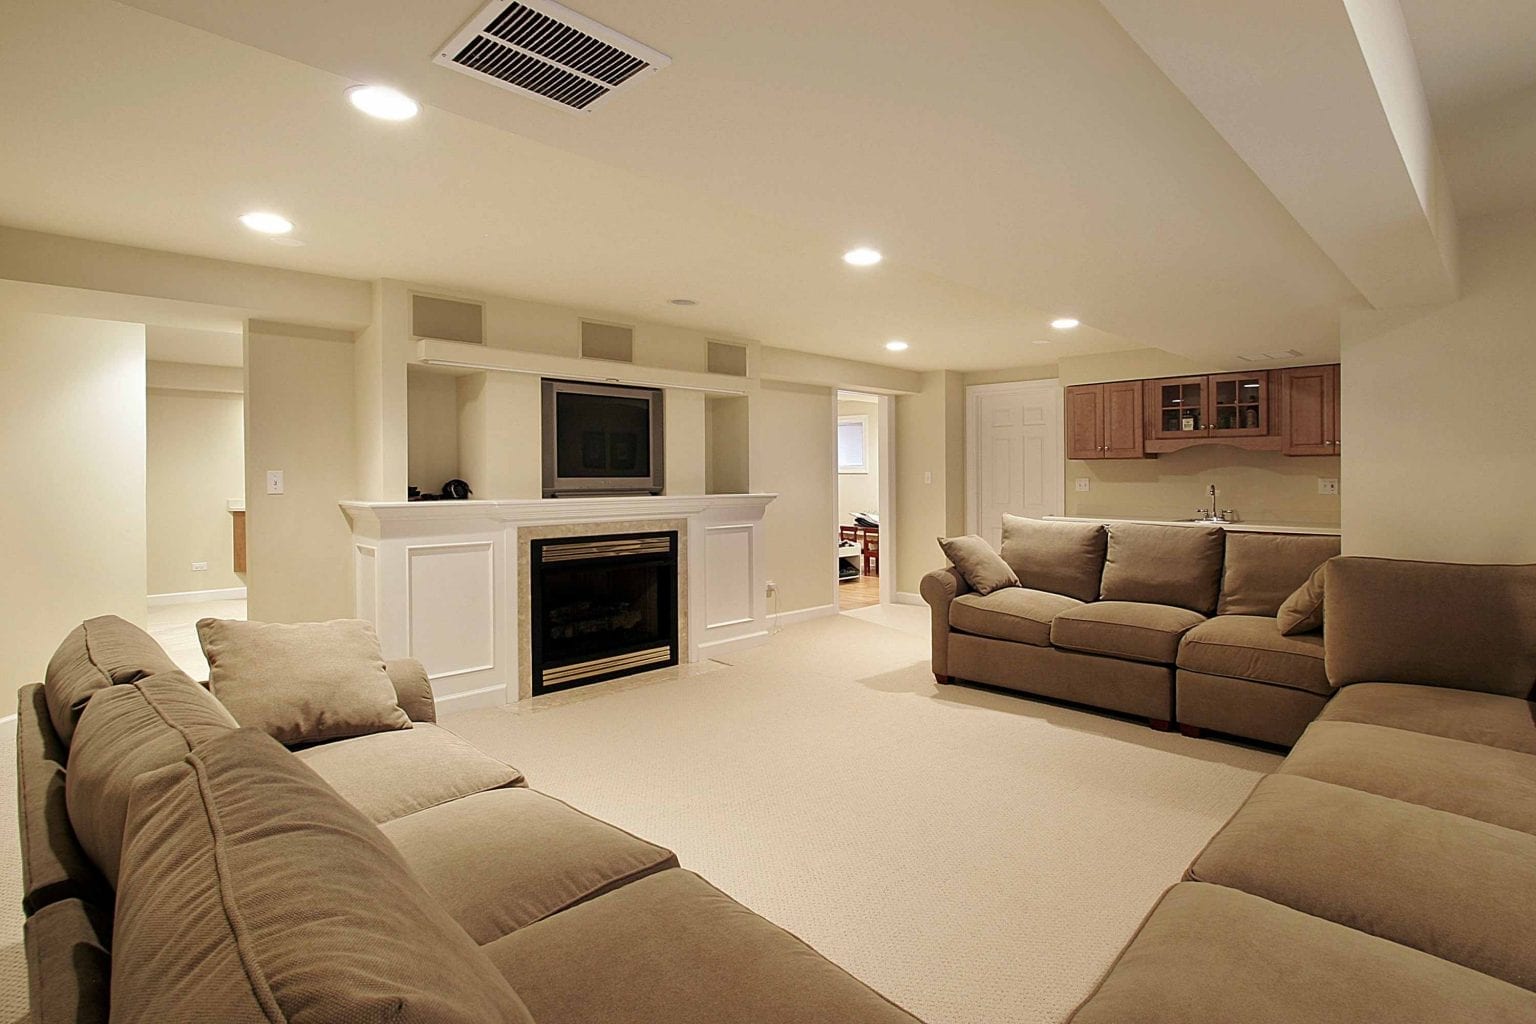 Best Basement Paint Colors: Transform Your Basement From Drab To Fab